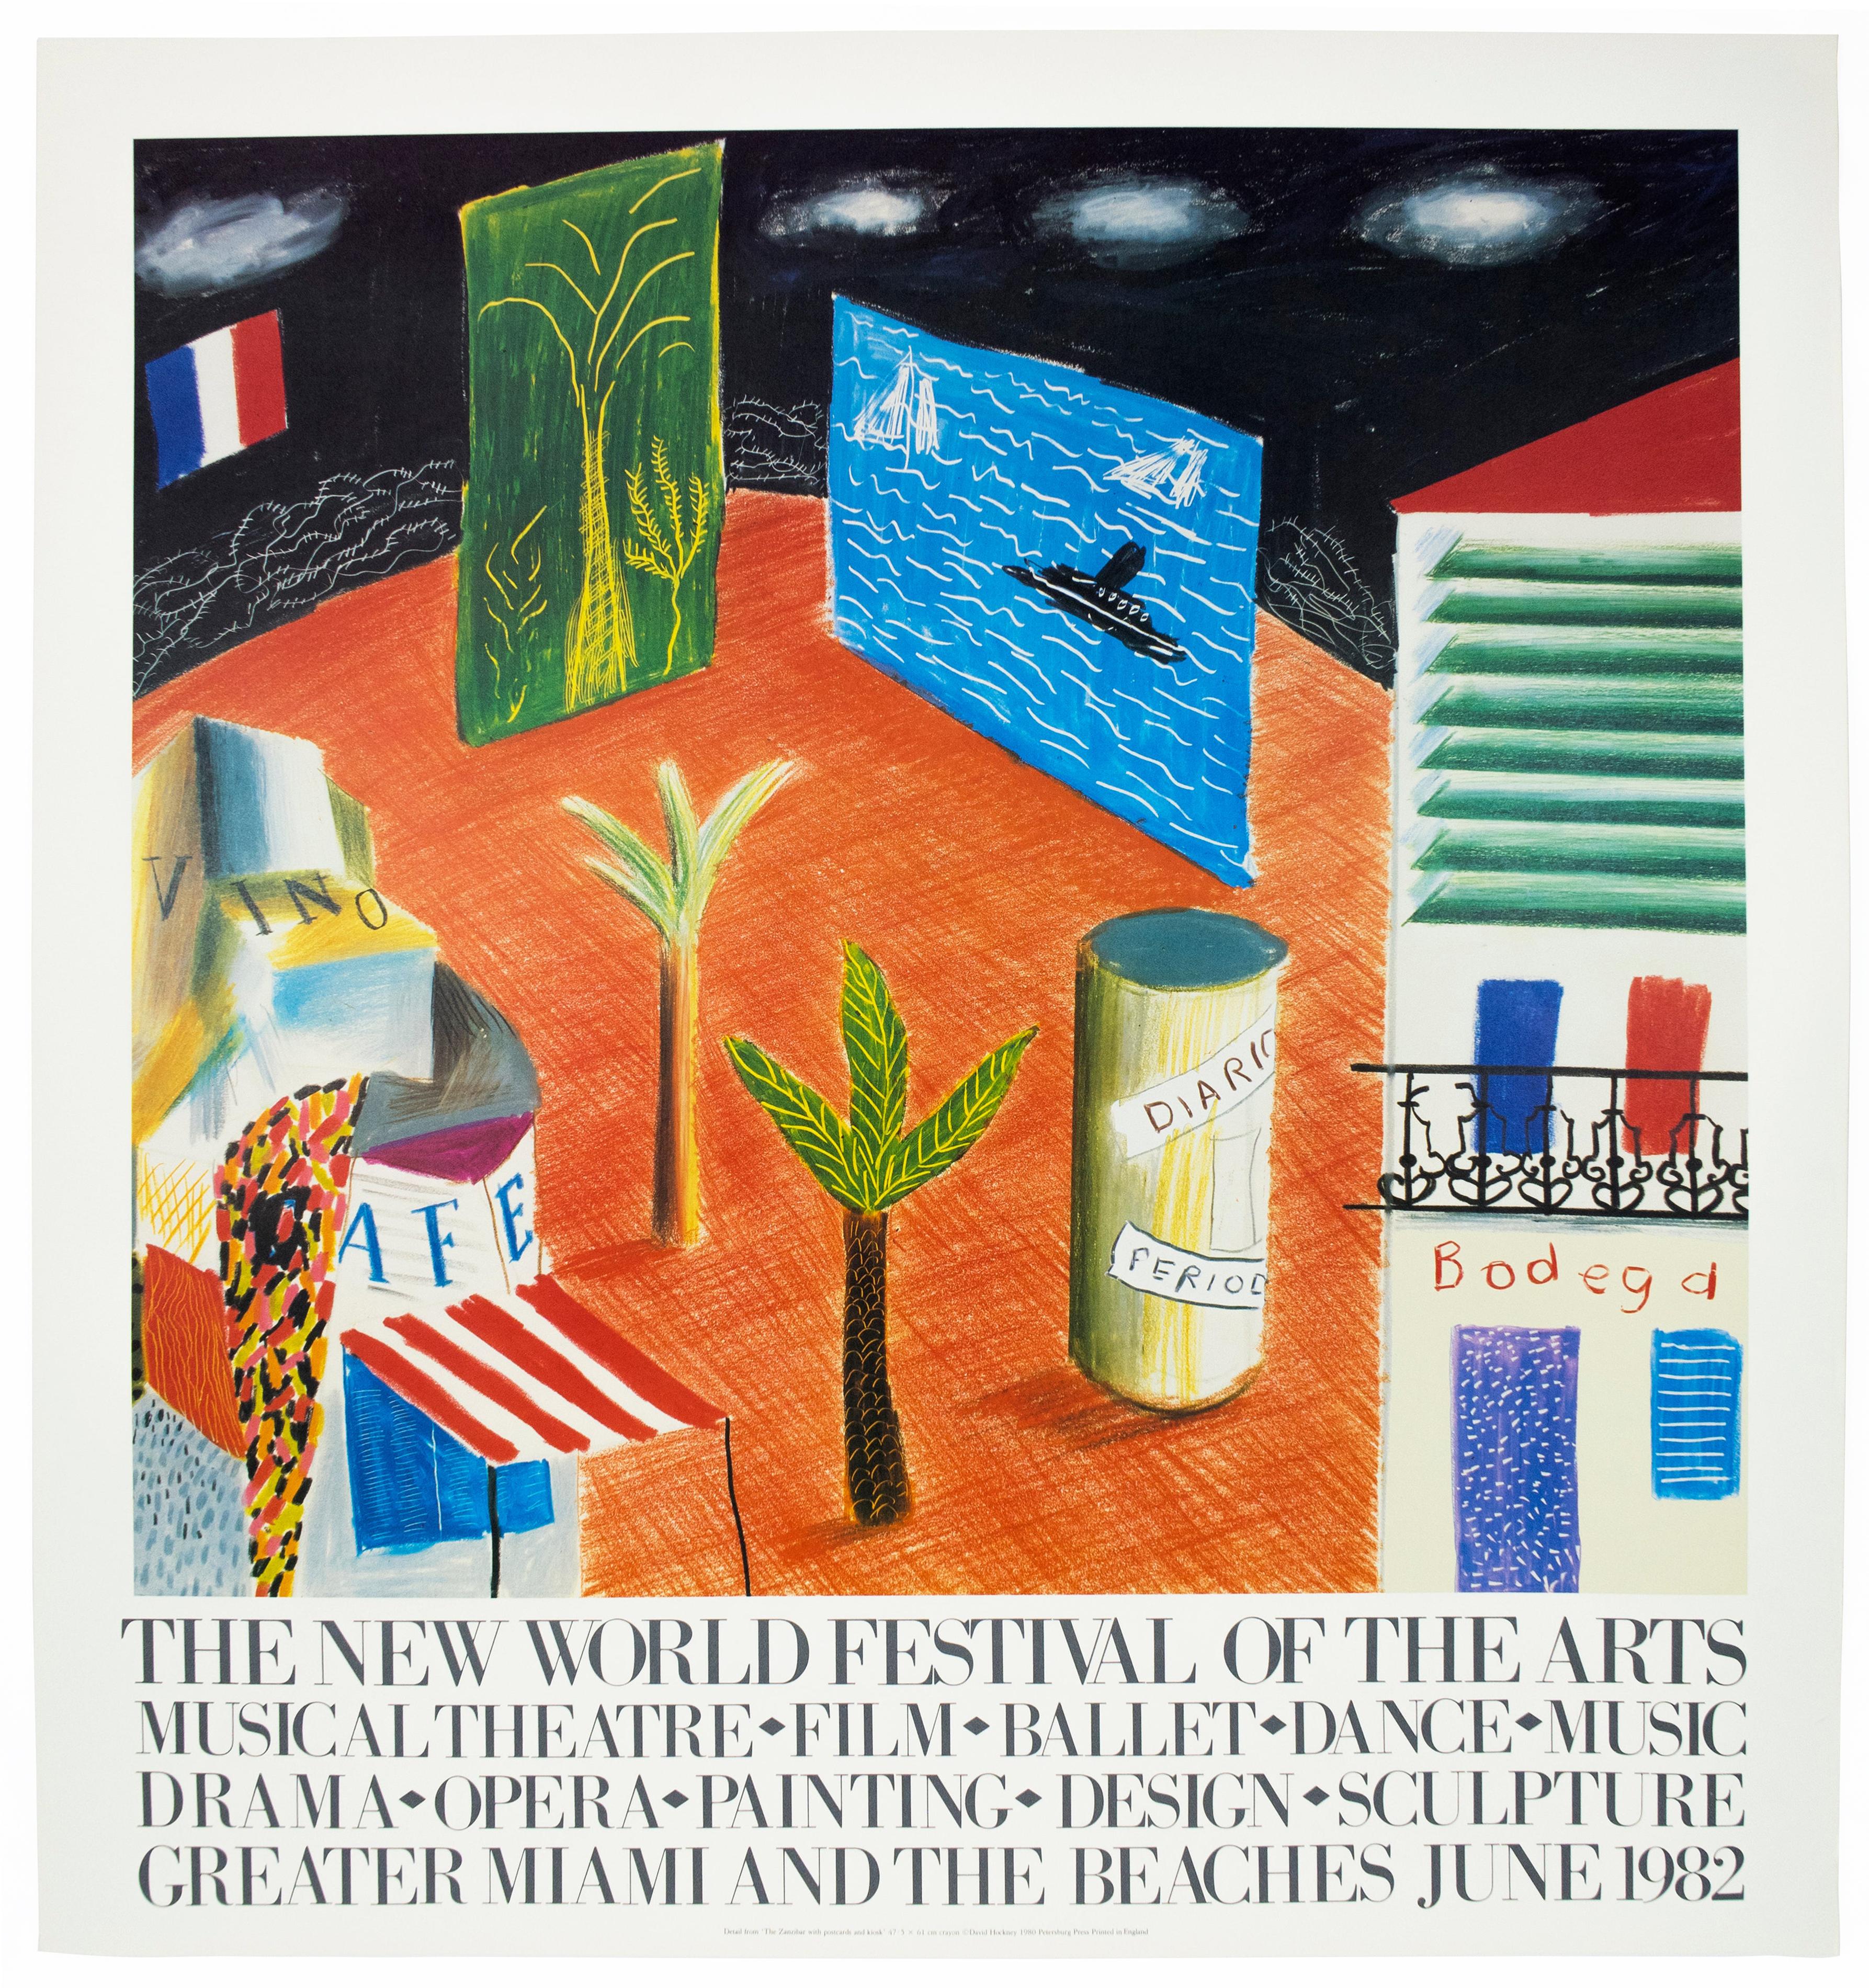 This vintage David Hockney poster features whimsical imagery and rich, bright color. Palm trees, boats in the ocean, a cafe, and a bodega with an elaborate iron-wrought balcony sit atop a crosshatched orange ground. In 1980, Miami hosted what the